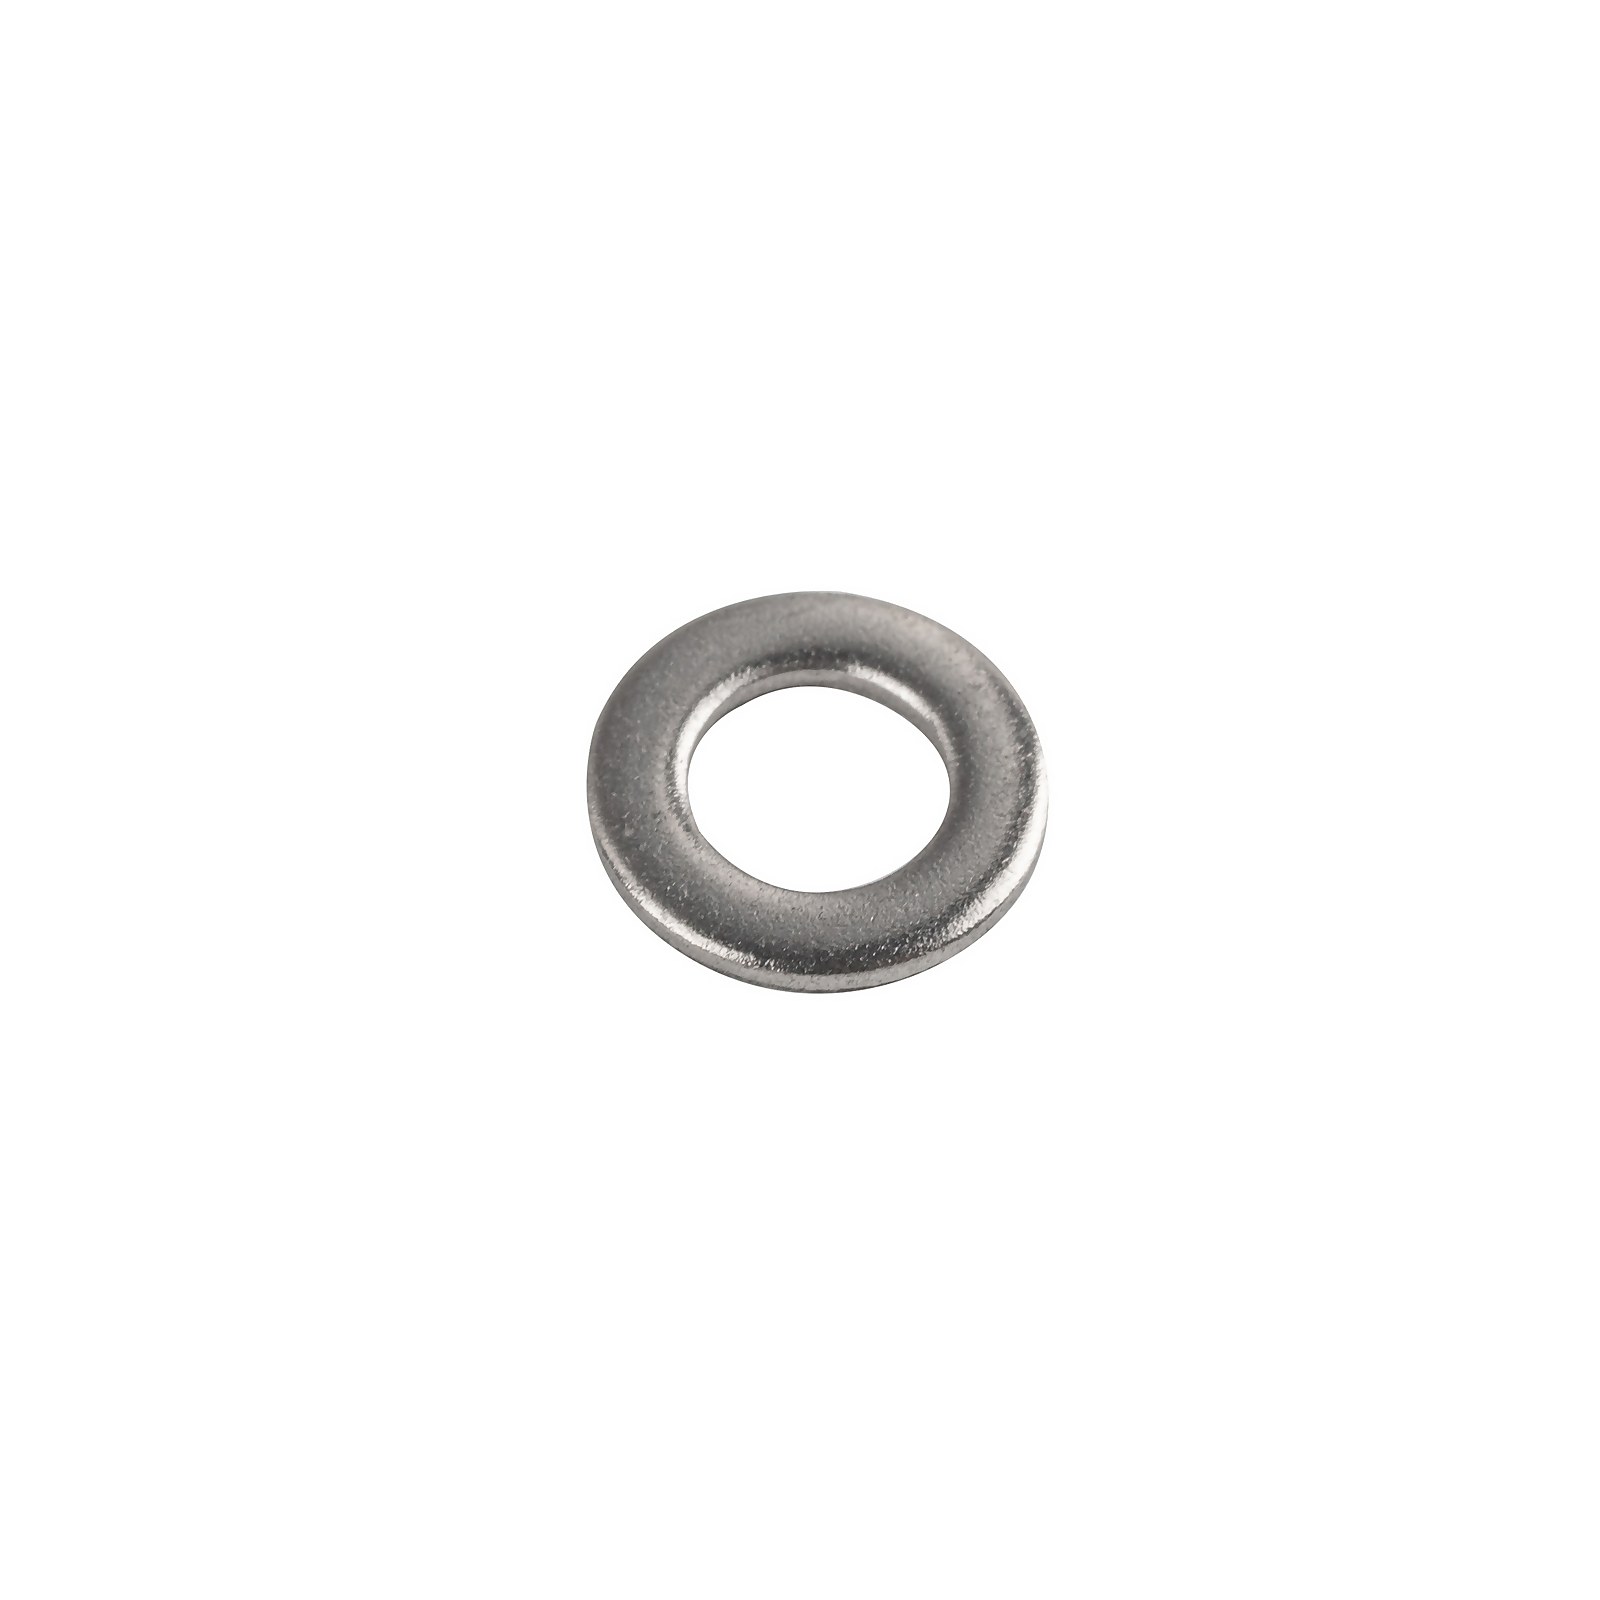 Homebase Stainless Steel Washer M5 25 Pack